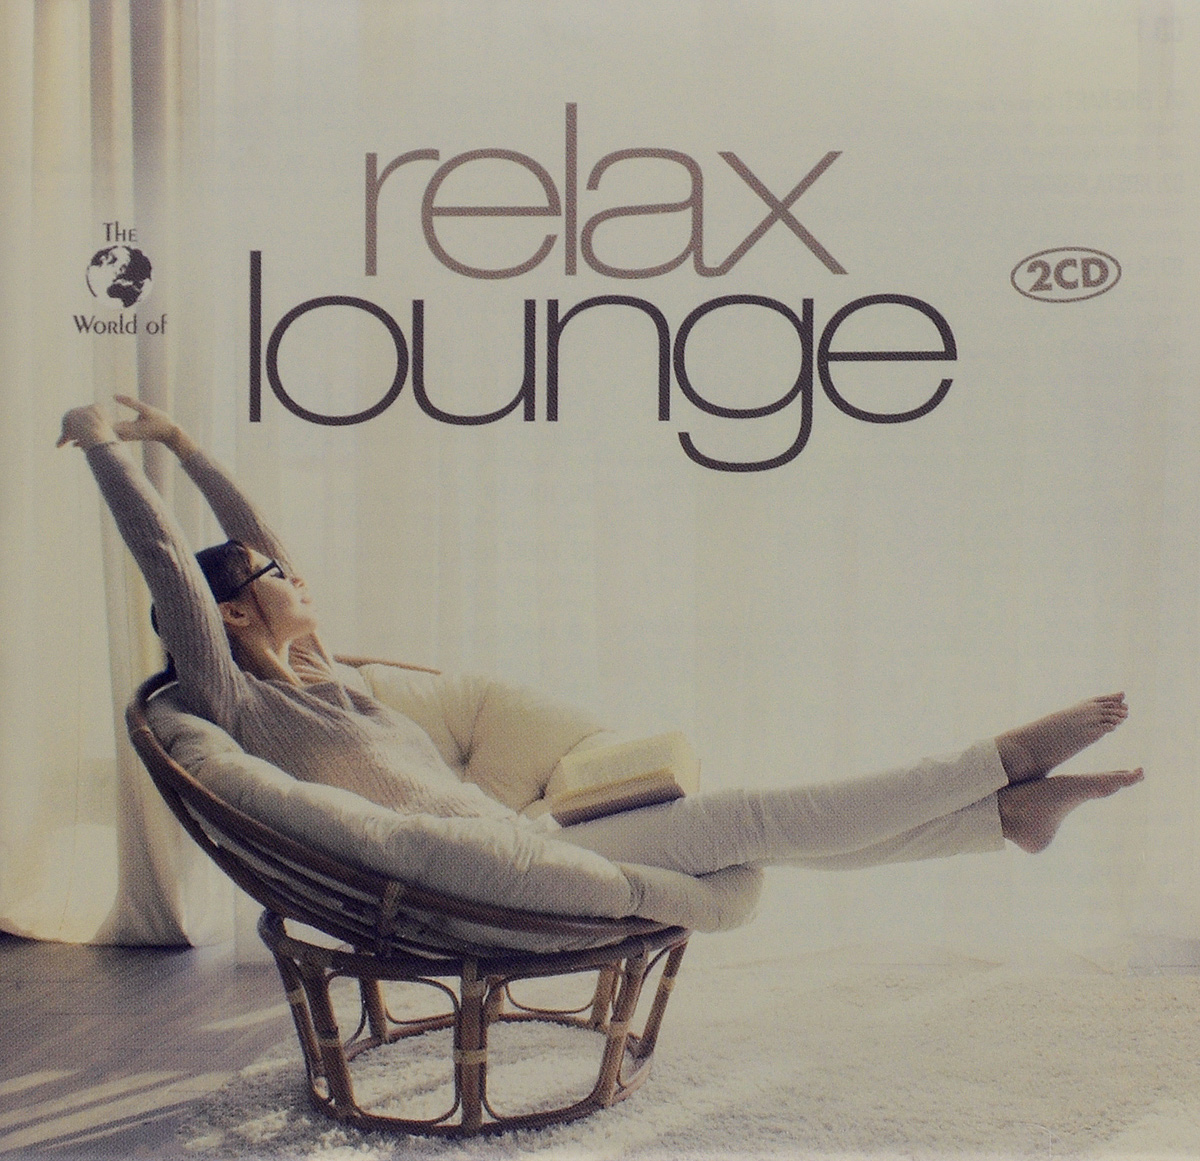 The World Of Relax Lounge (2 CD)